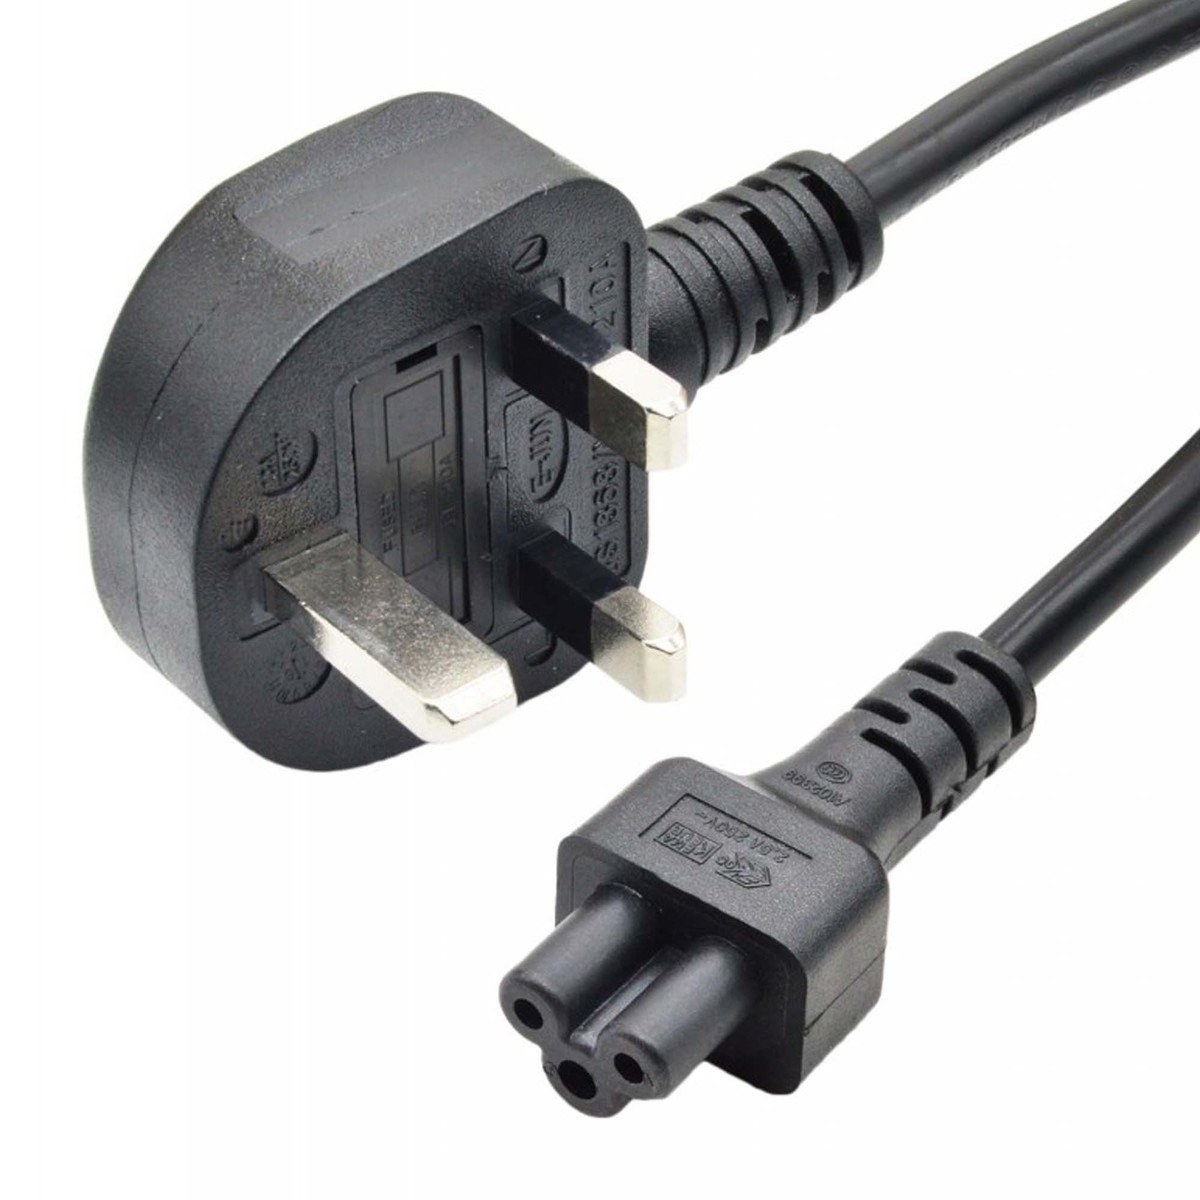 Trands Laptop Power Cable Laptop Charger 3 Meter CA861